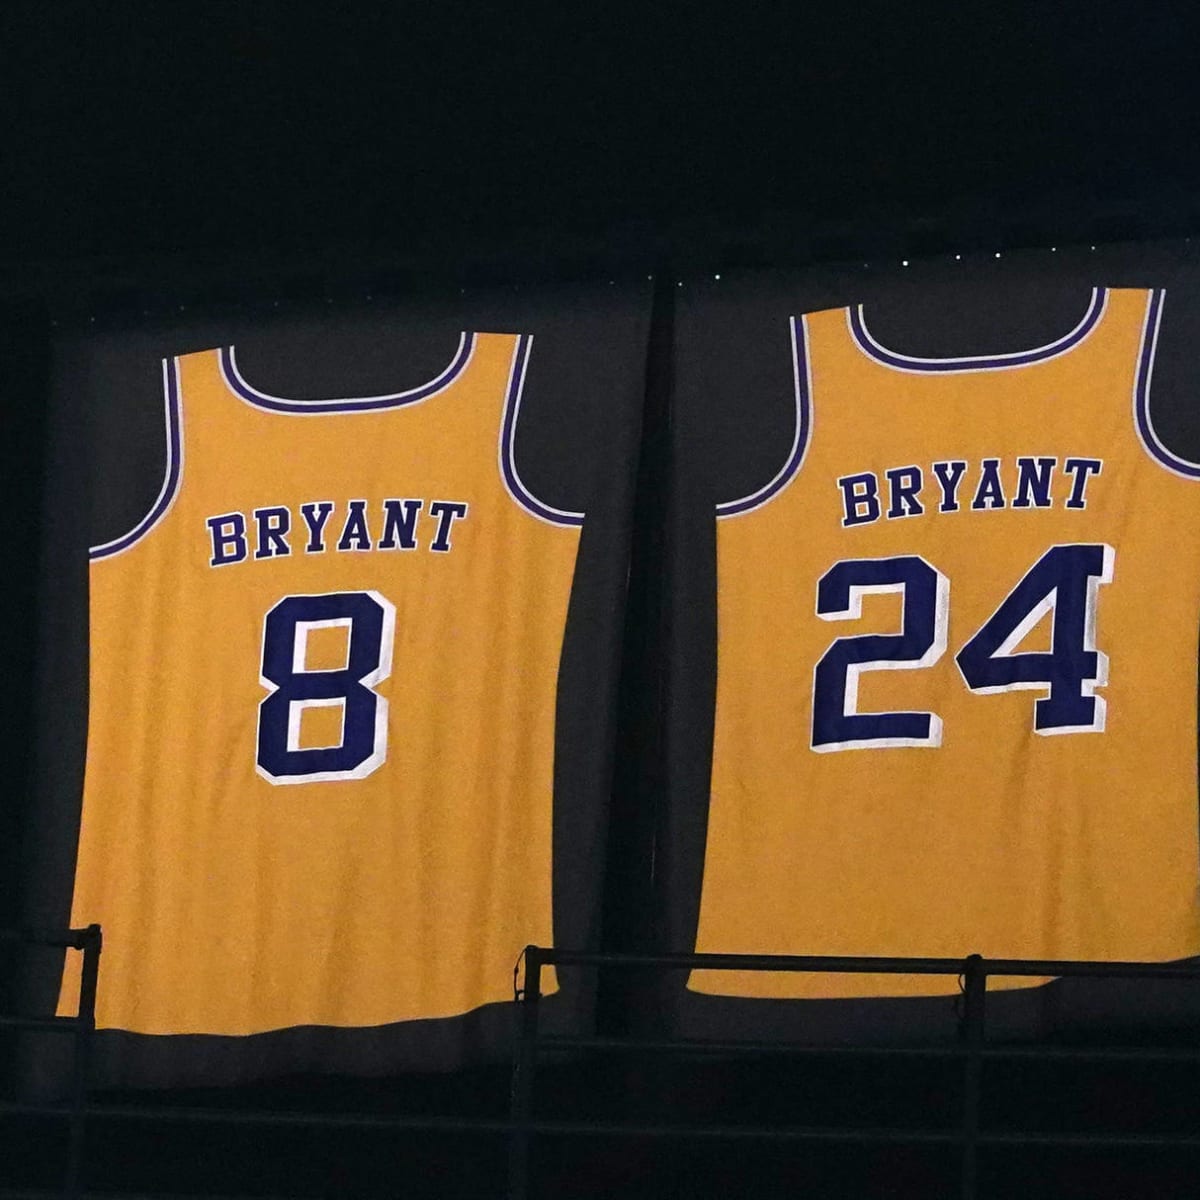 The LA Lakers Are Bringing Back The Black Mamba Jersey To Honour